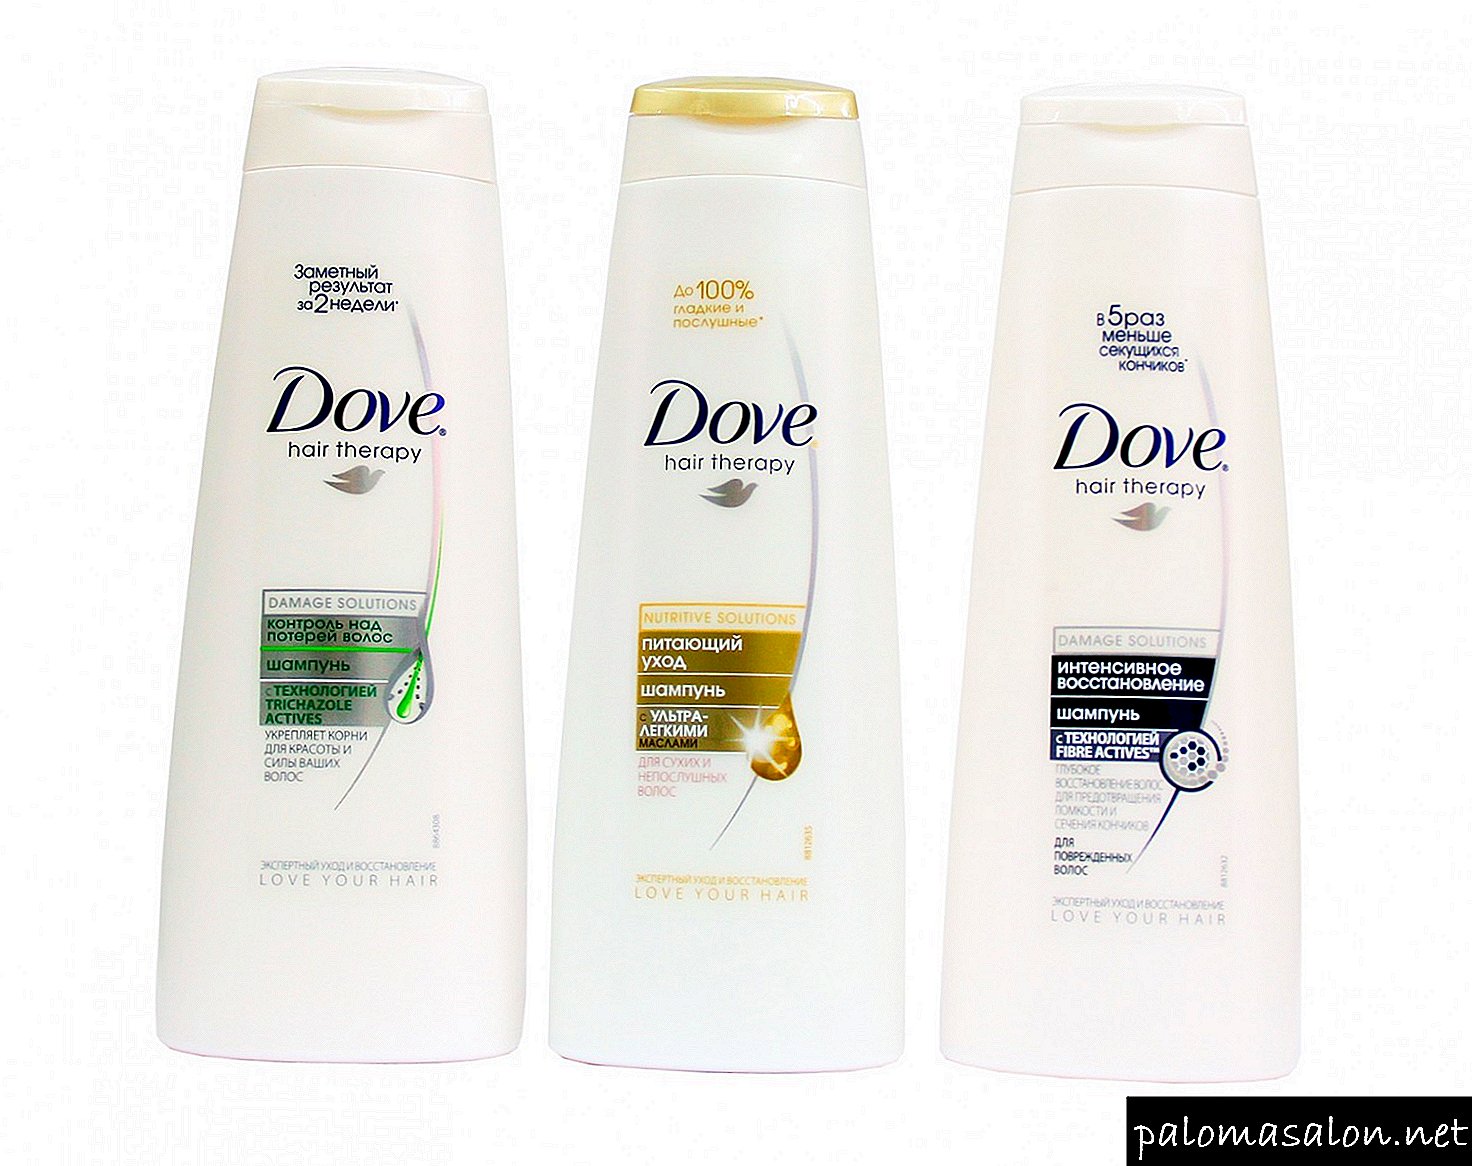 Dove shampoos - 8 types of effective hair remedies